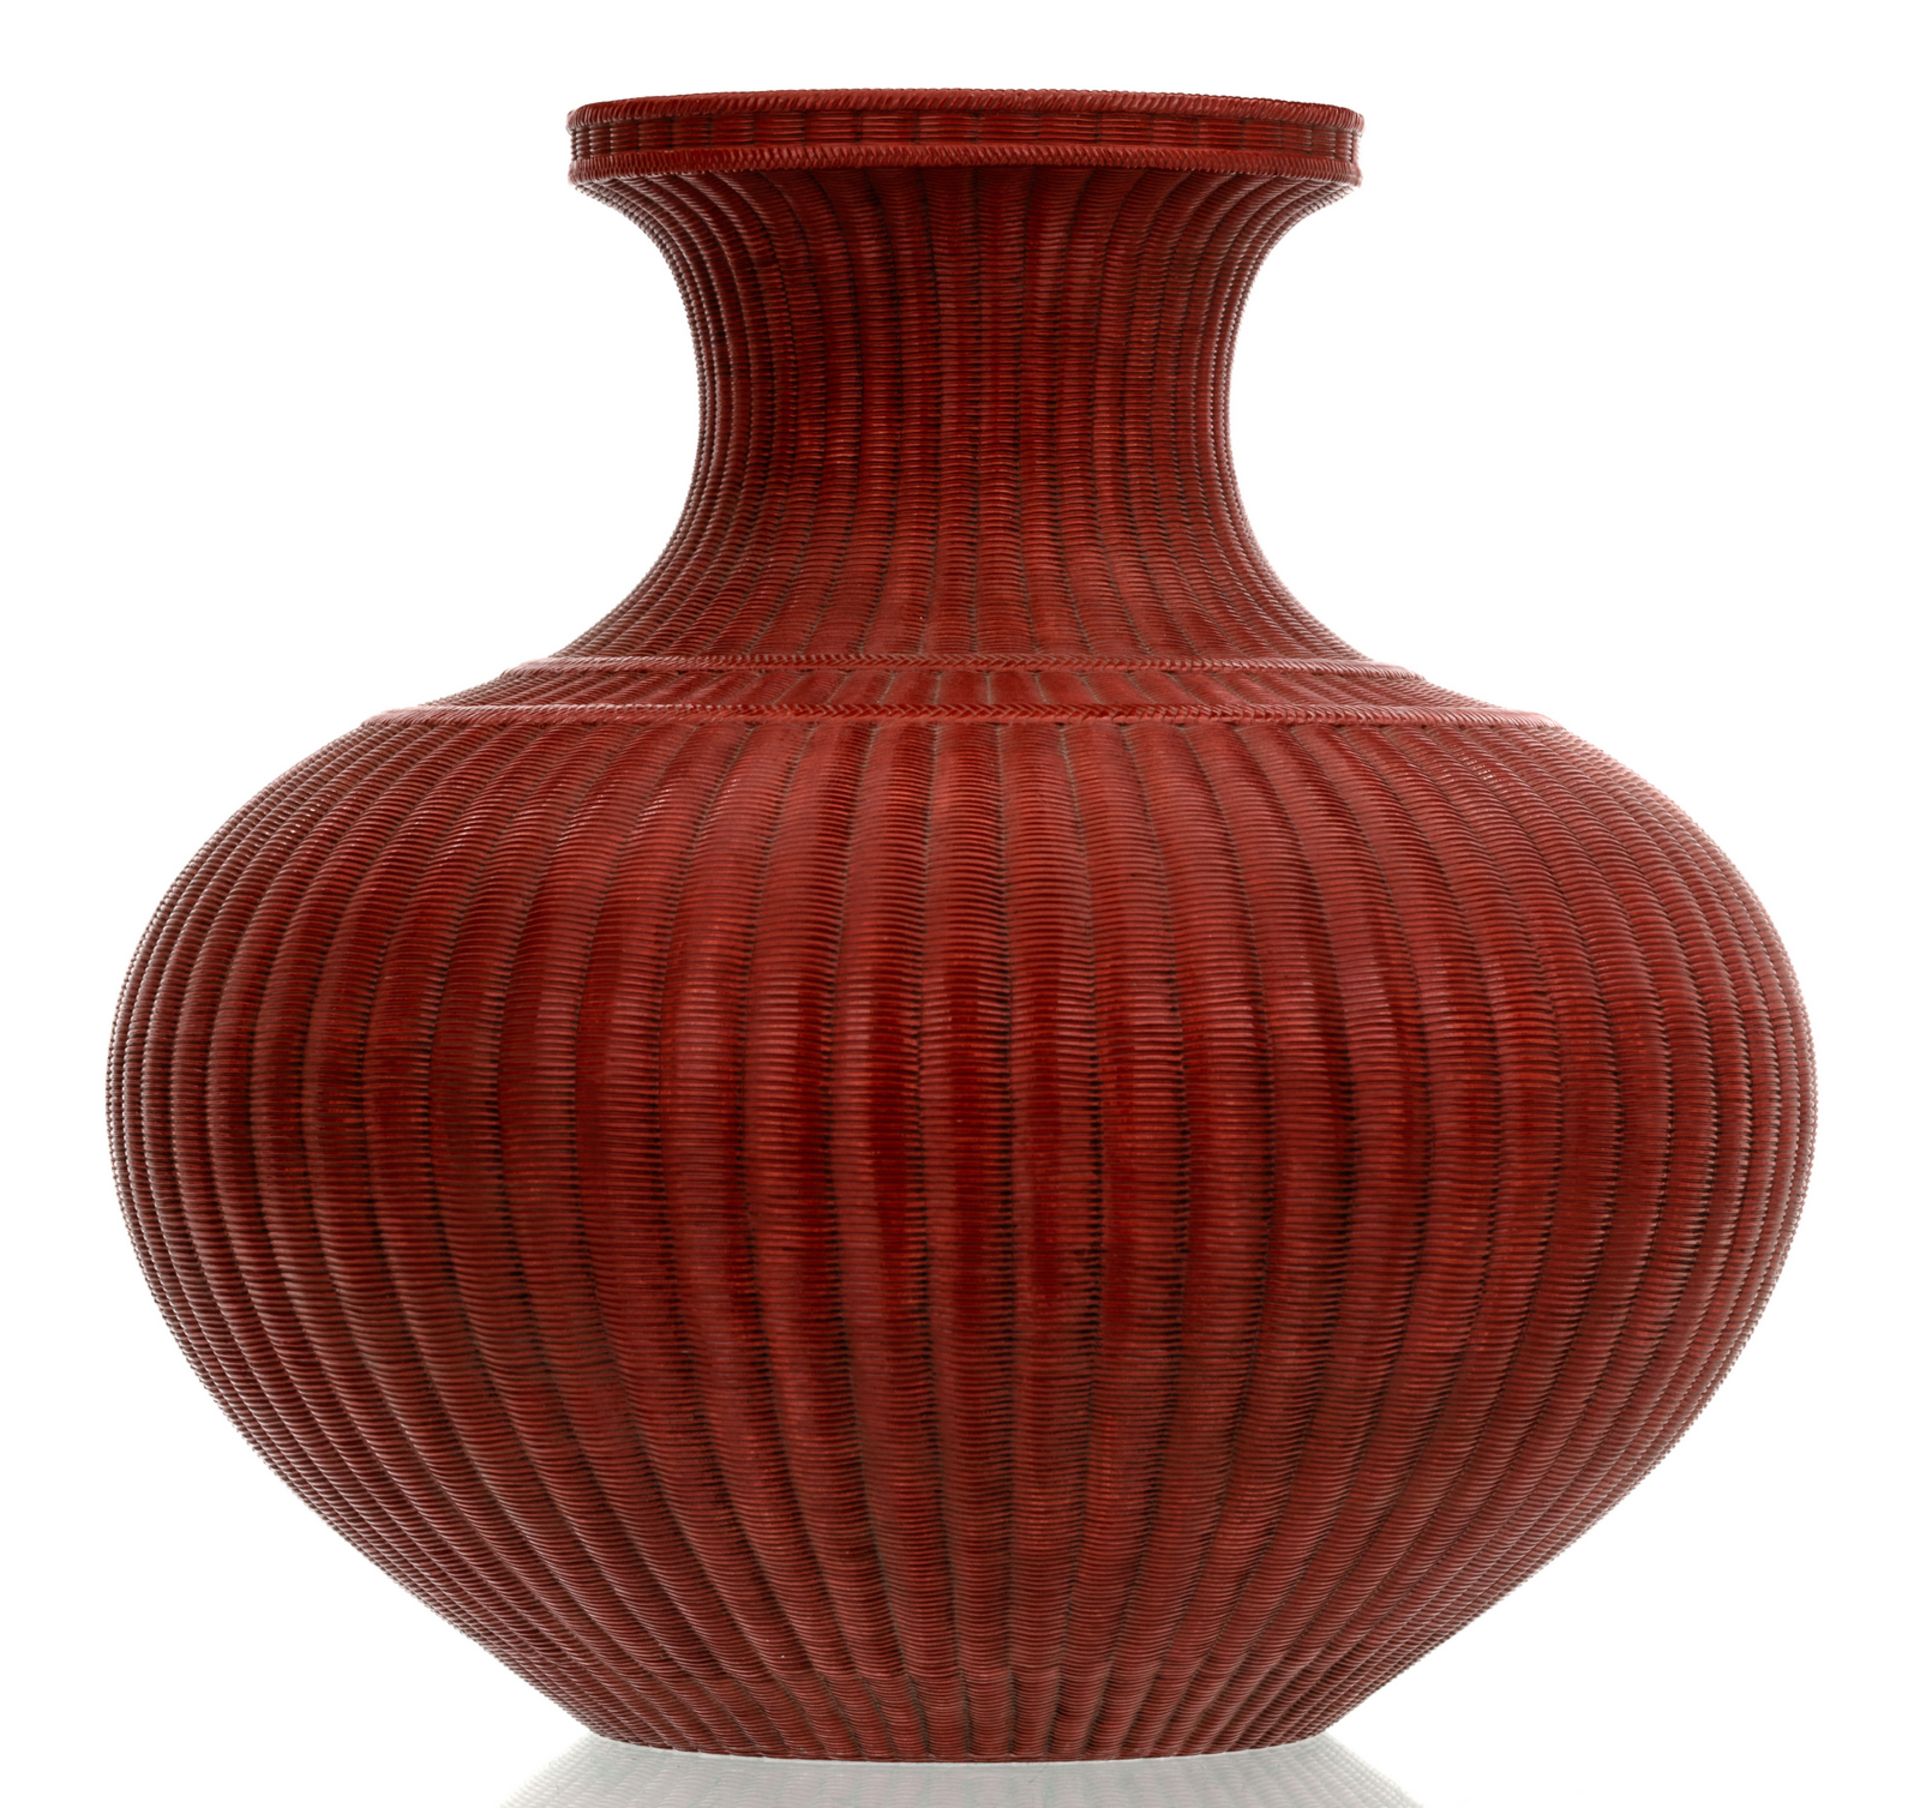 A fine Chinese red brown glazed reed basket shaped vase with a Yongzheng mark, H 40,5 cm - Image 3 of 7